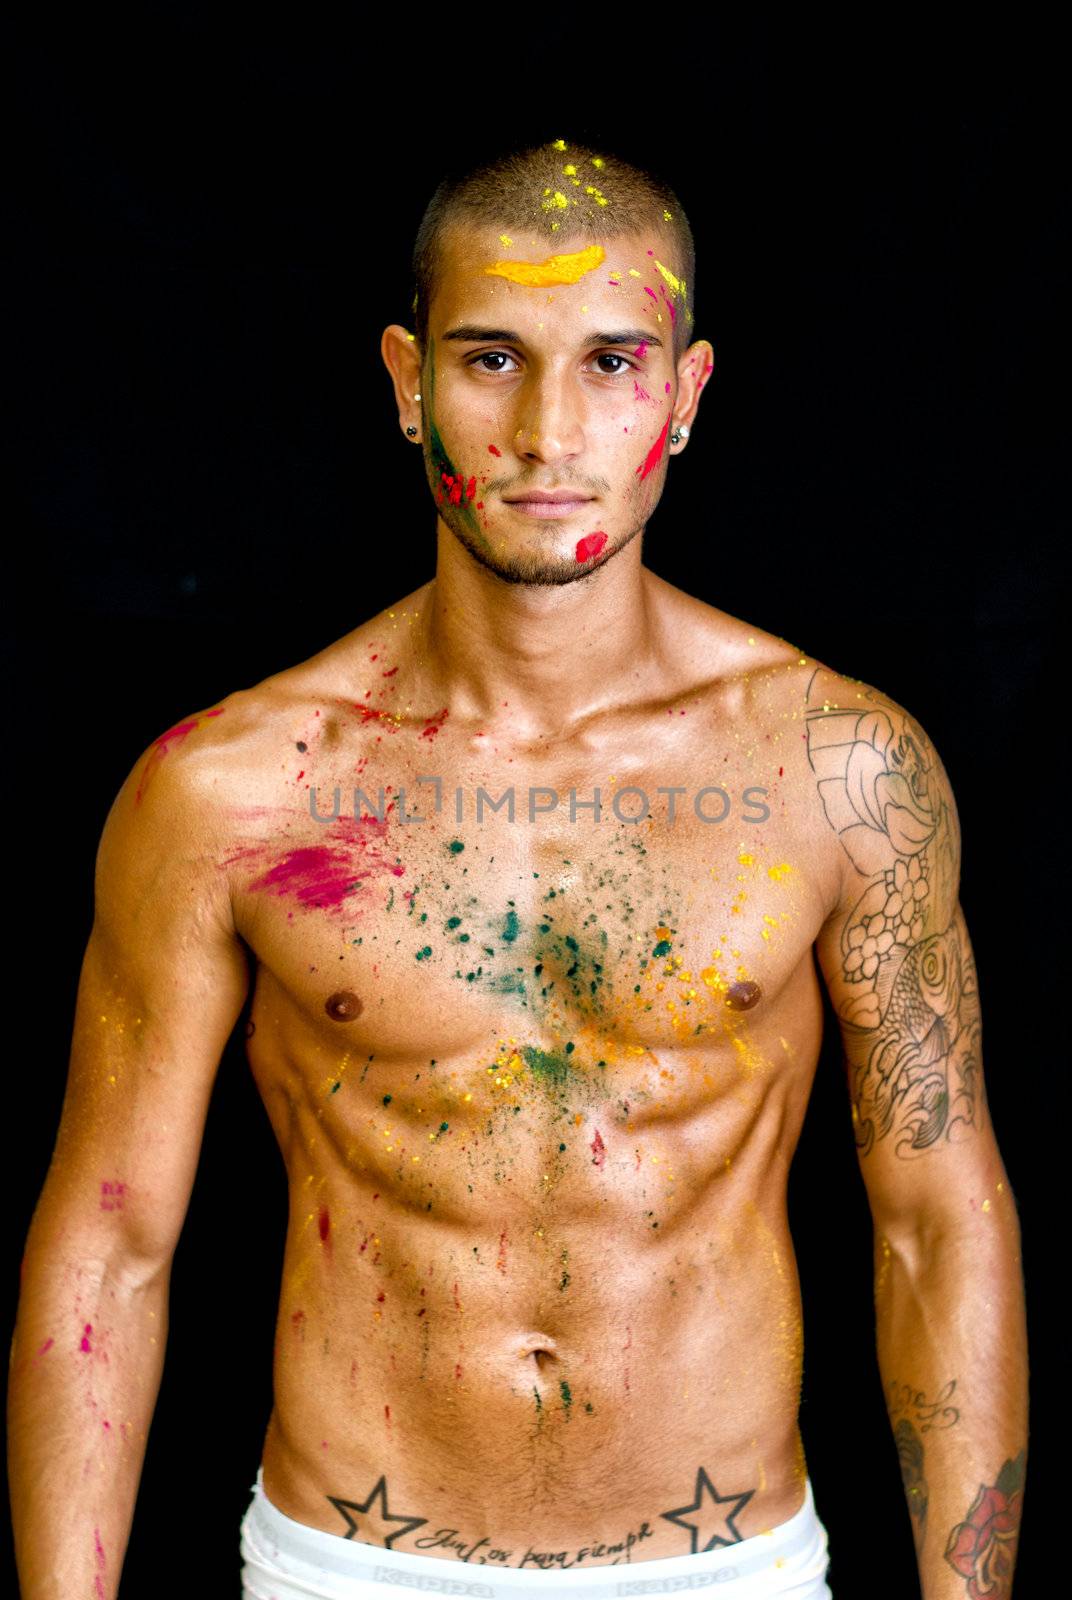 Attractive young man shirtless, skin painted all over with bright Honi  colors